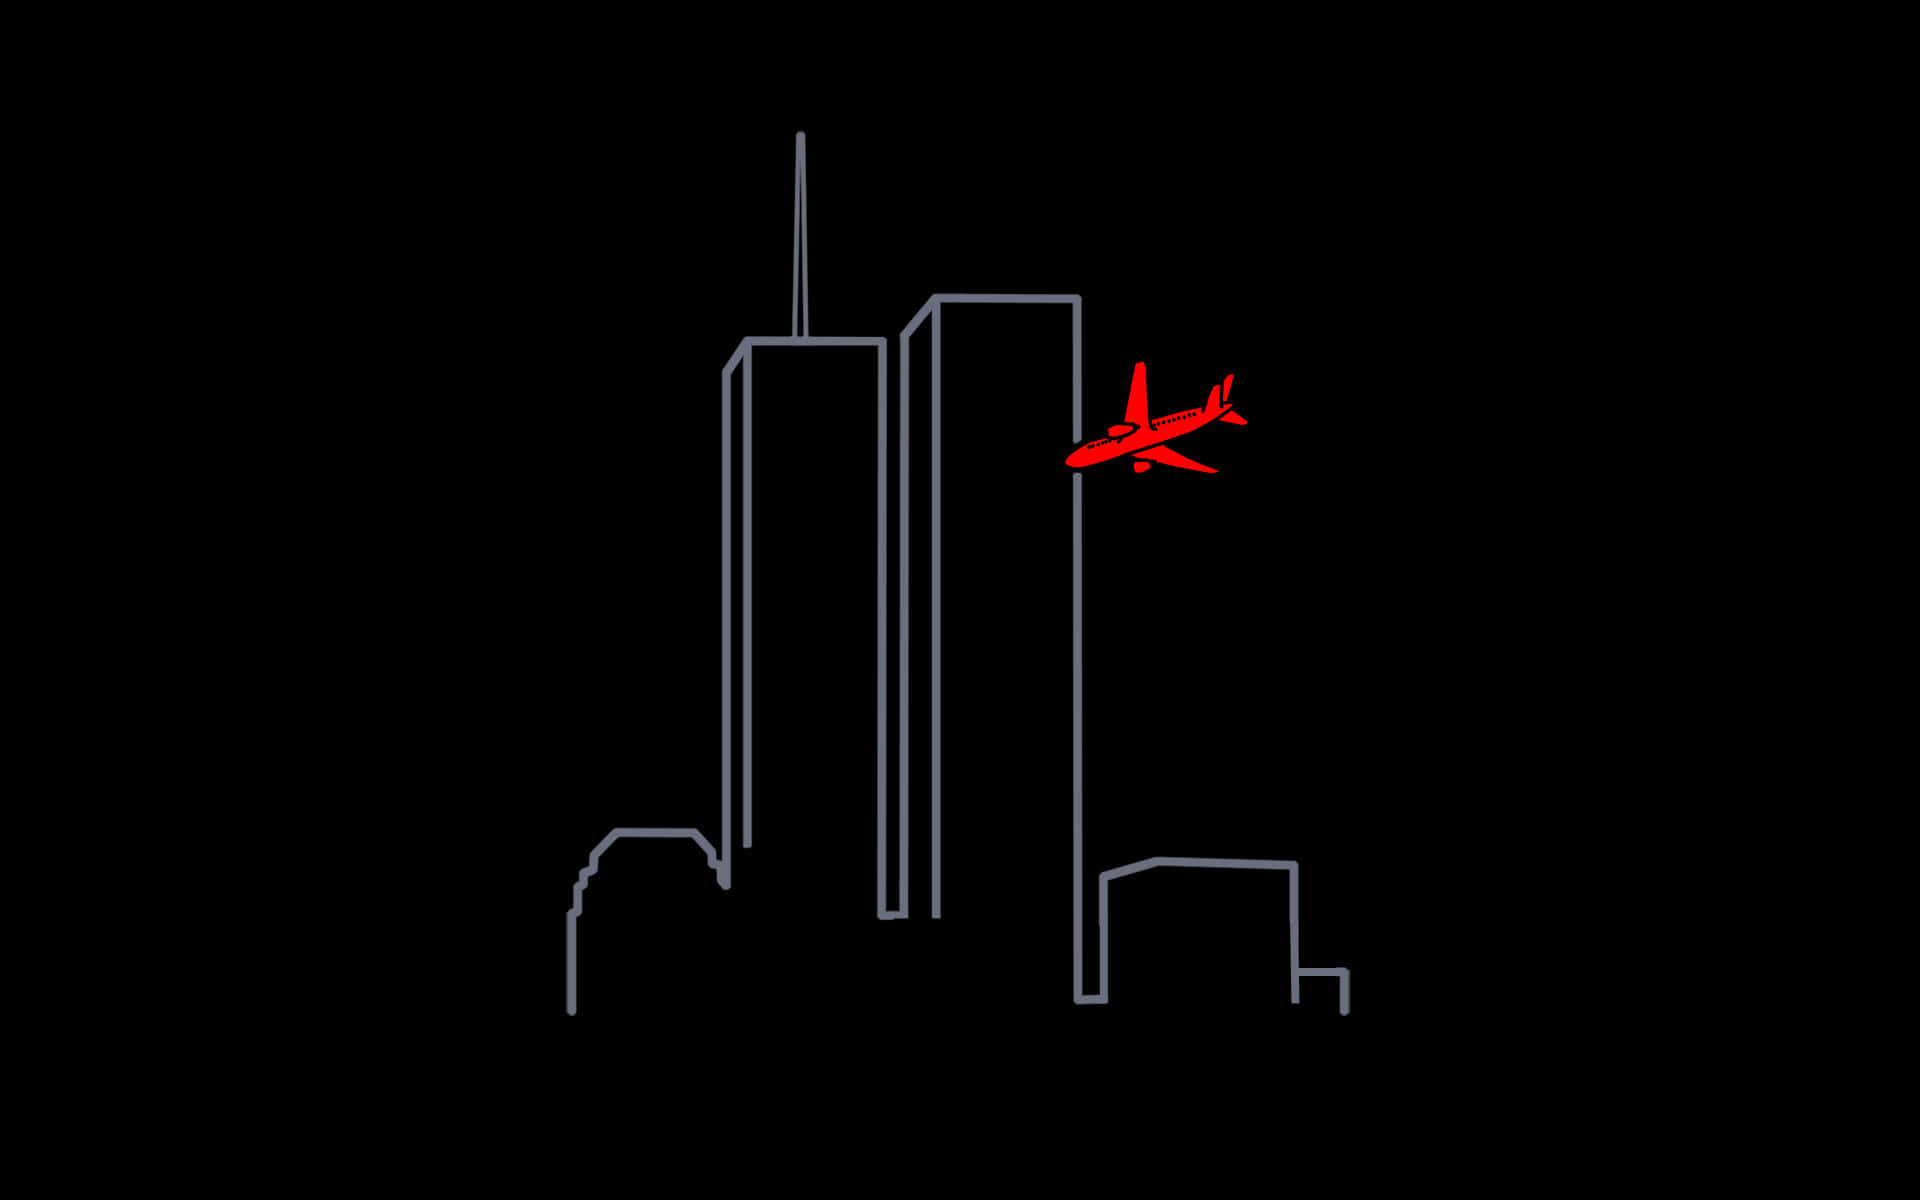 A Plane Is Flying Over The World Trade Center